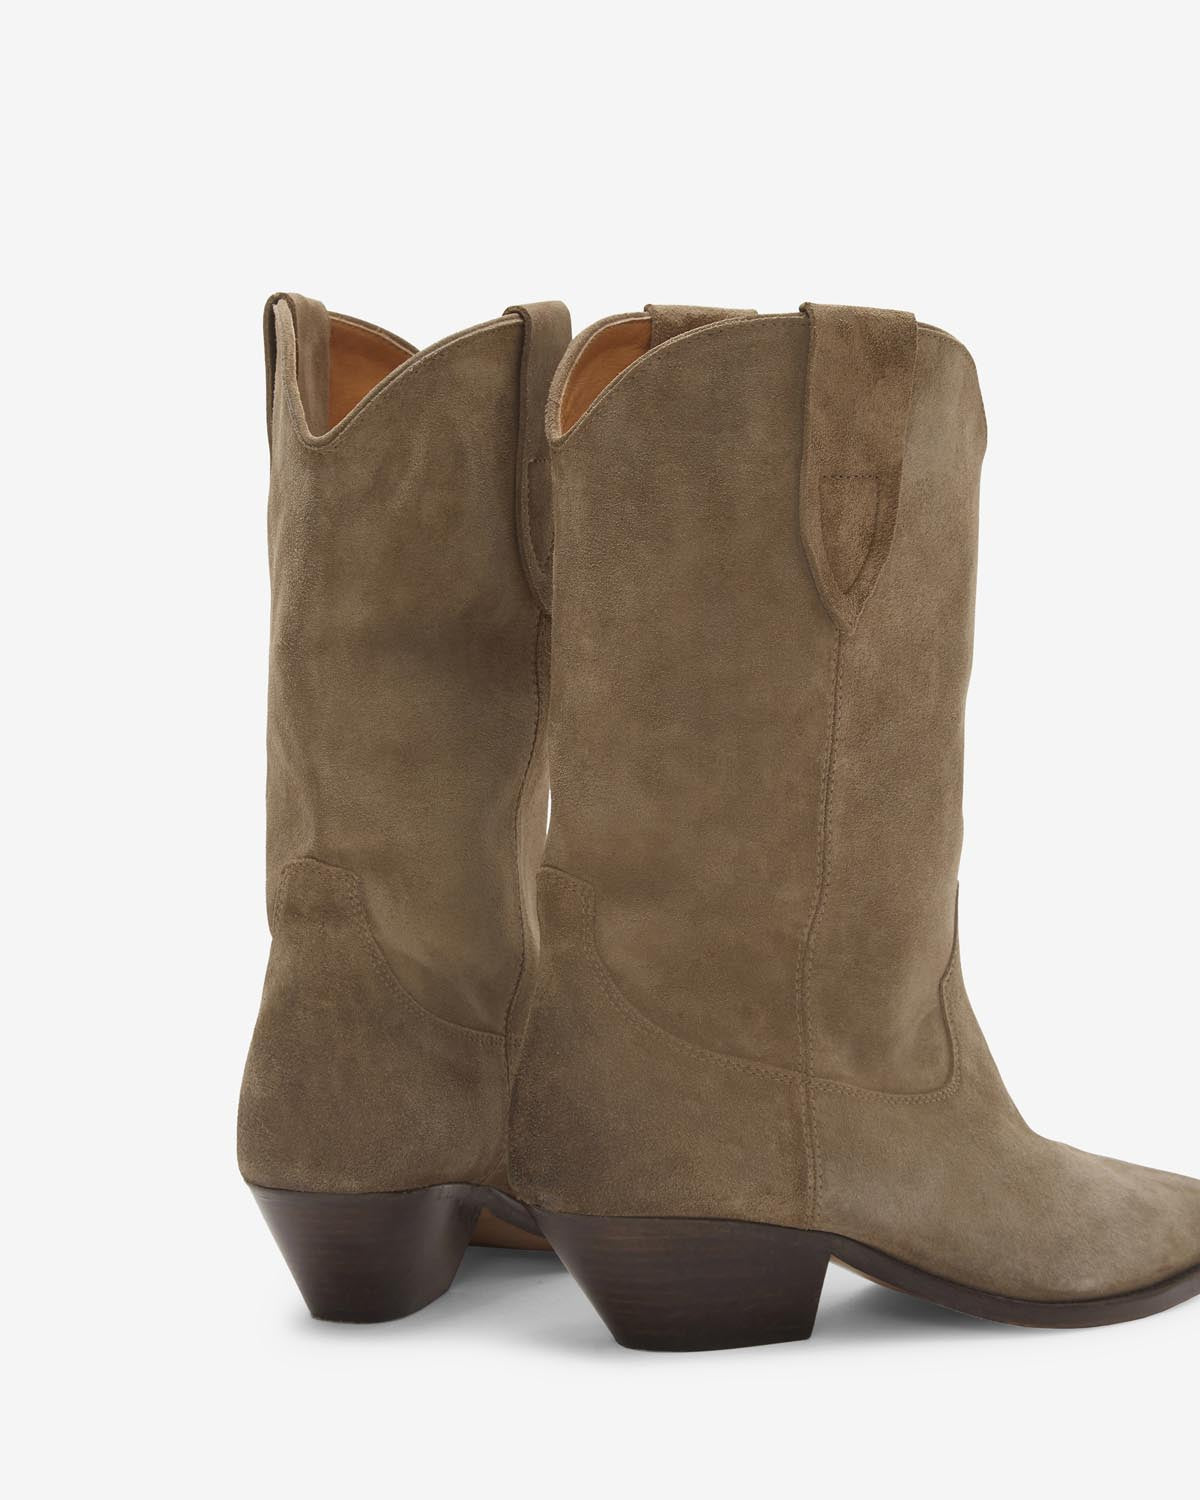 Stiefel duerto Woman Taupe 2